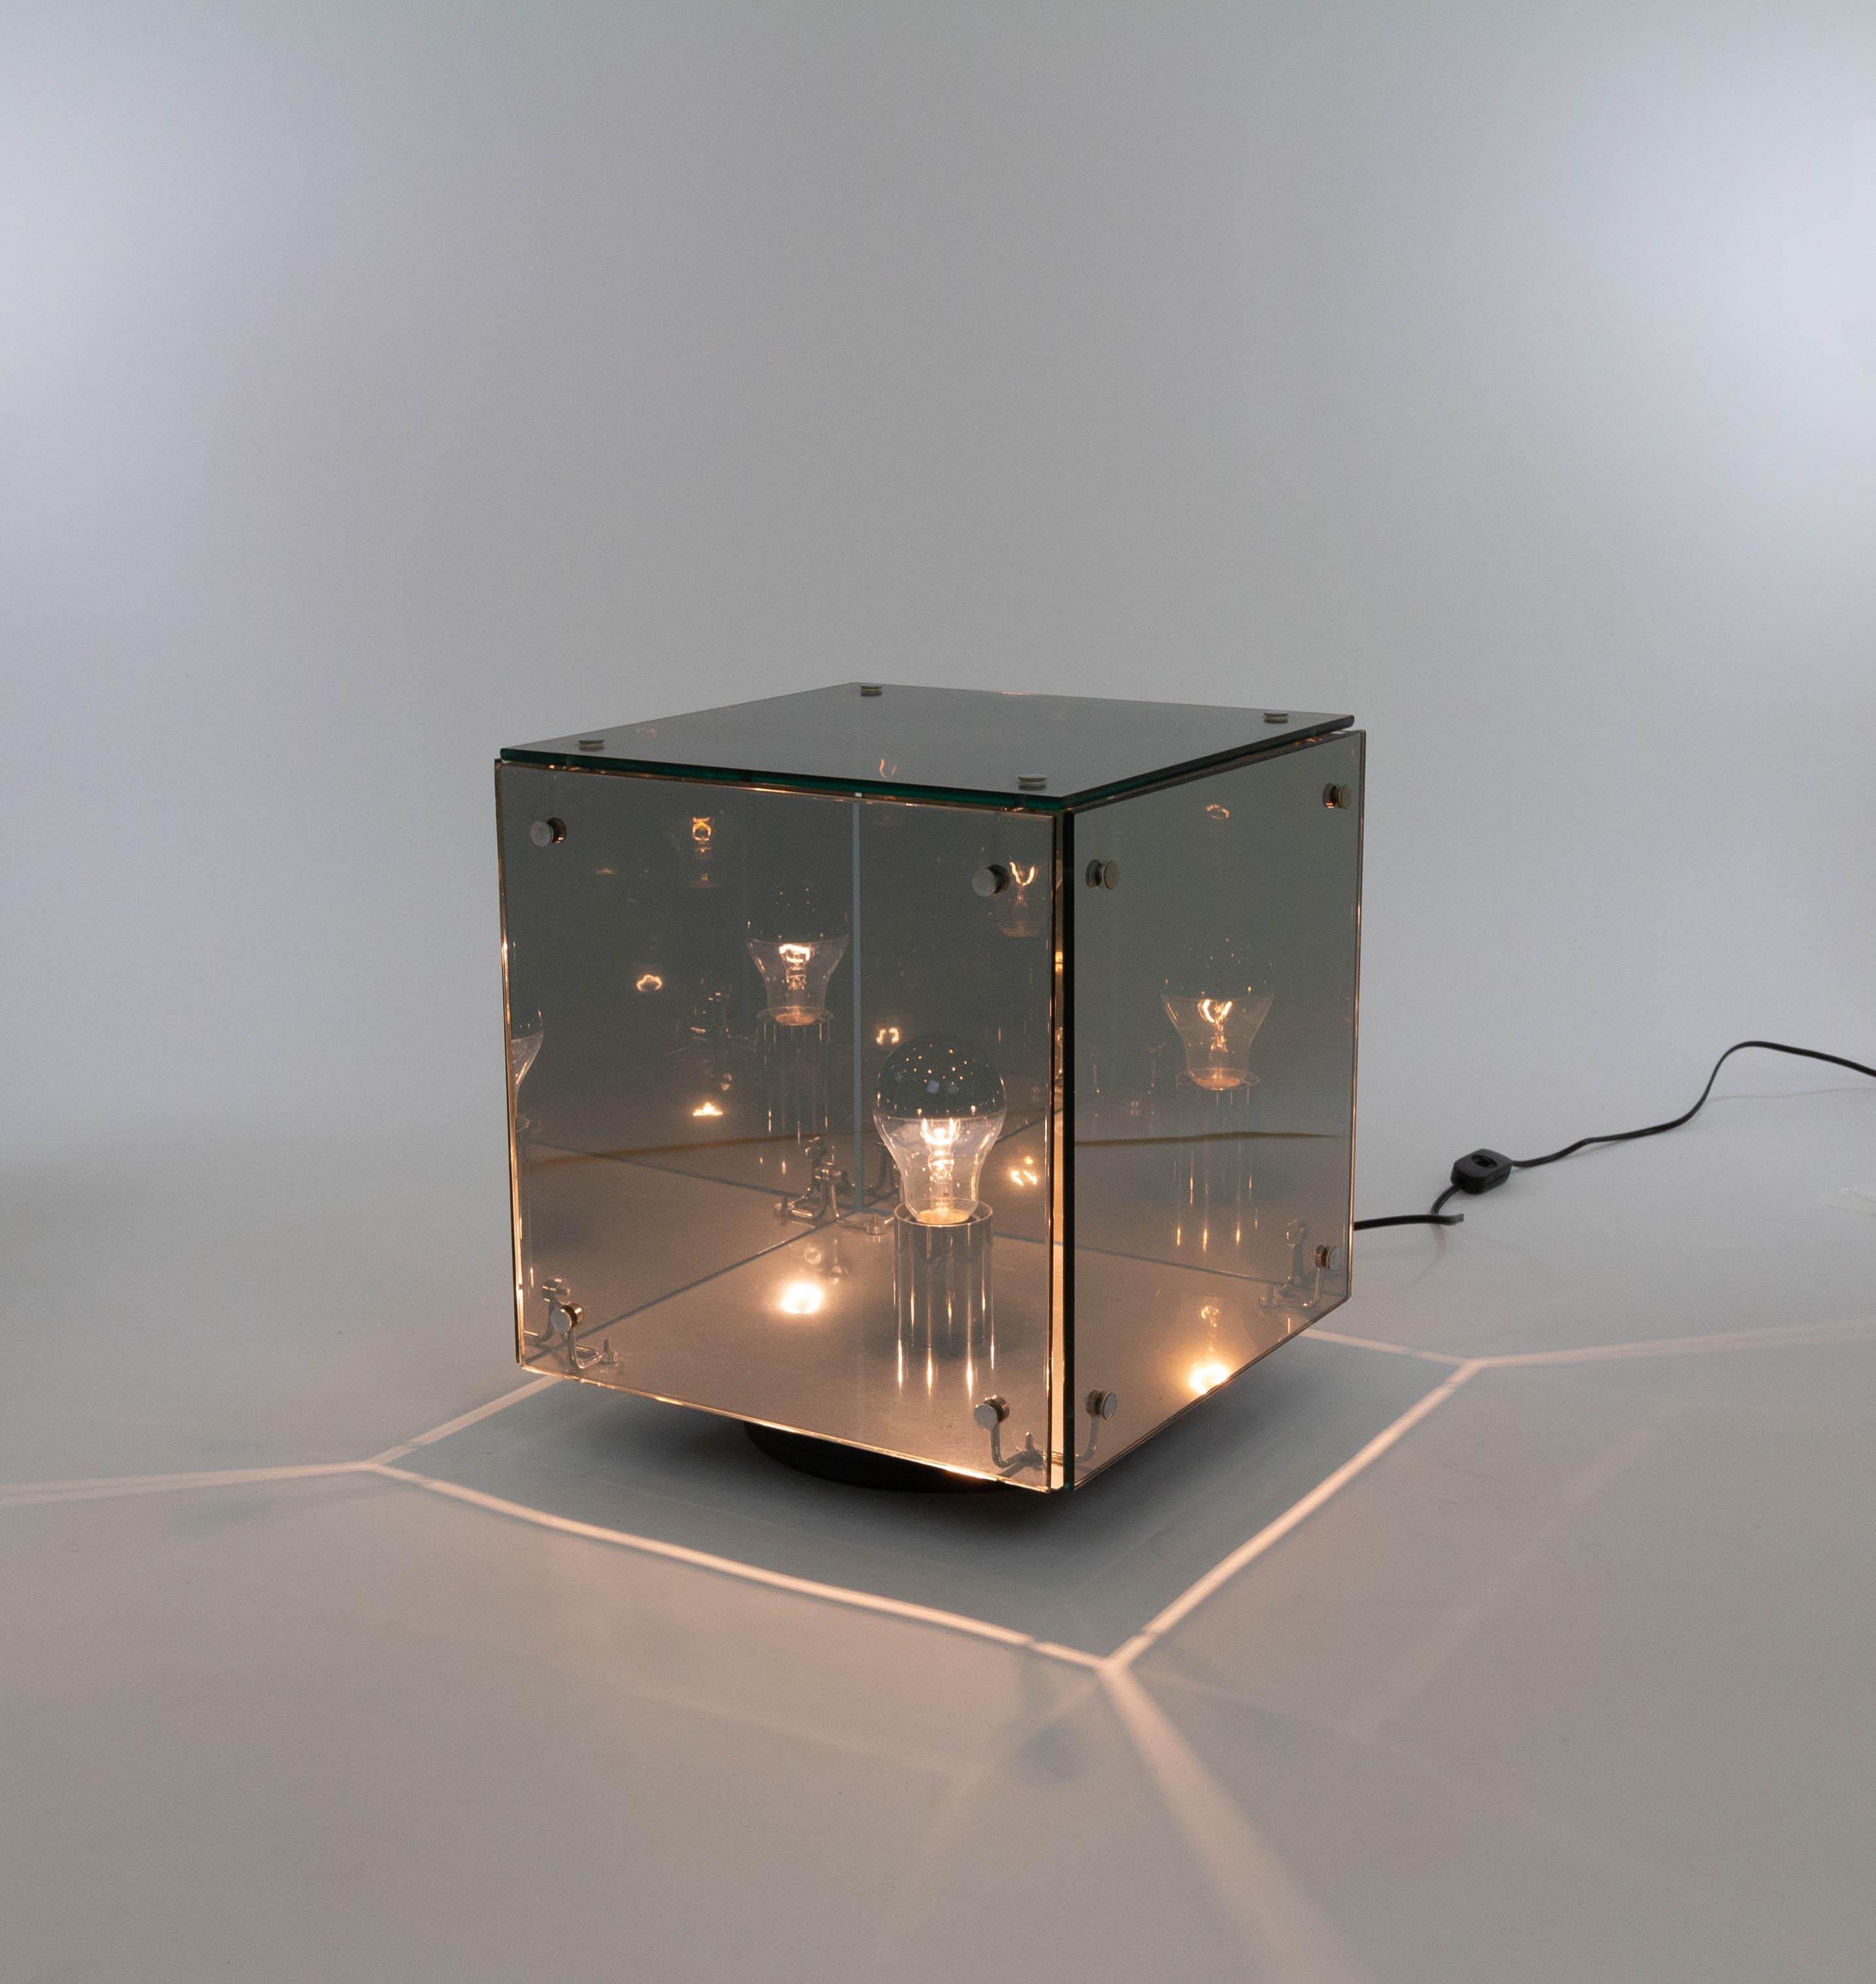 Cube shaped Prismar table lamp designed by Studio A.R.D.I.T.I. in 1972 and produced by Nucleo Sormani.

This table or floor lamp consists of 5 mirror-like smoky grey elements, held together by subtle connecting chrome-plated pieces. The five glass